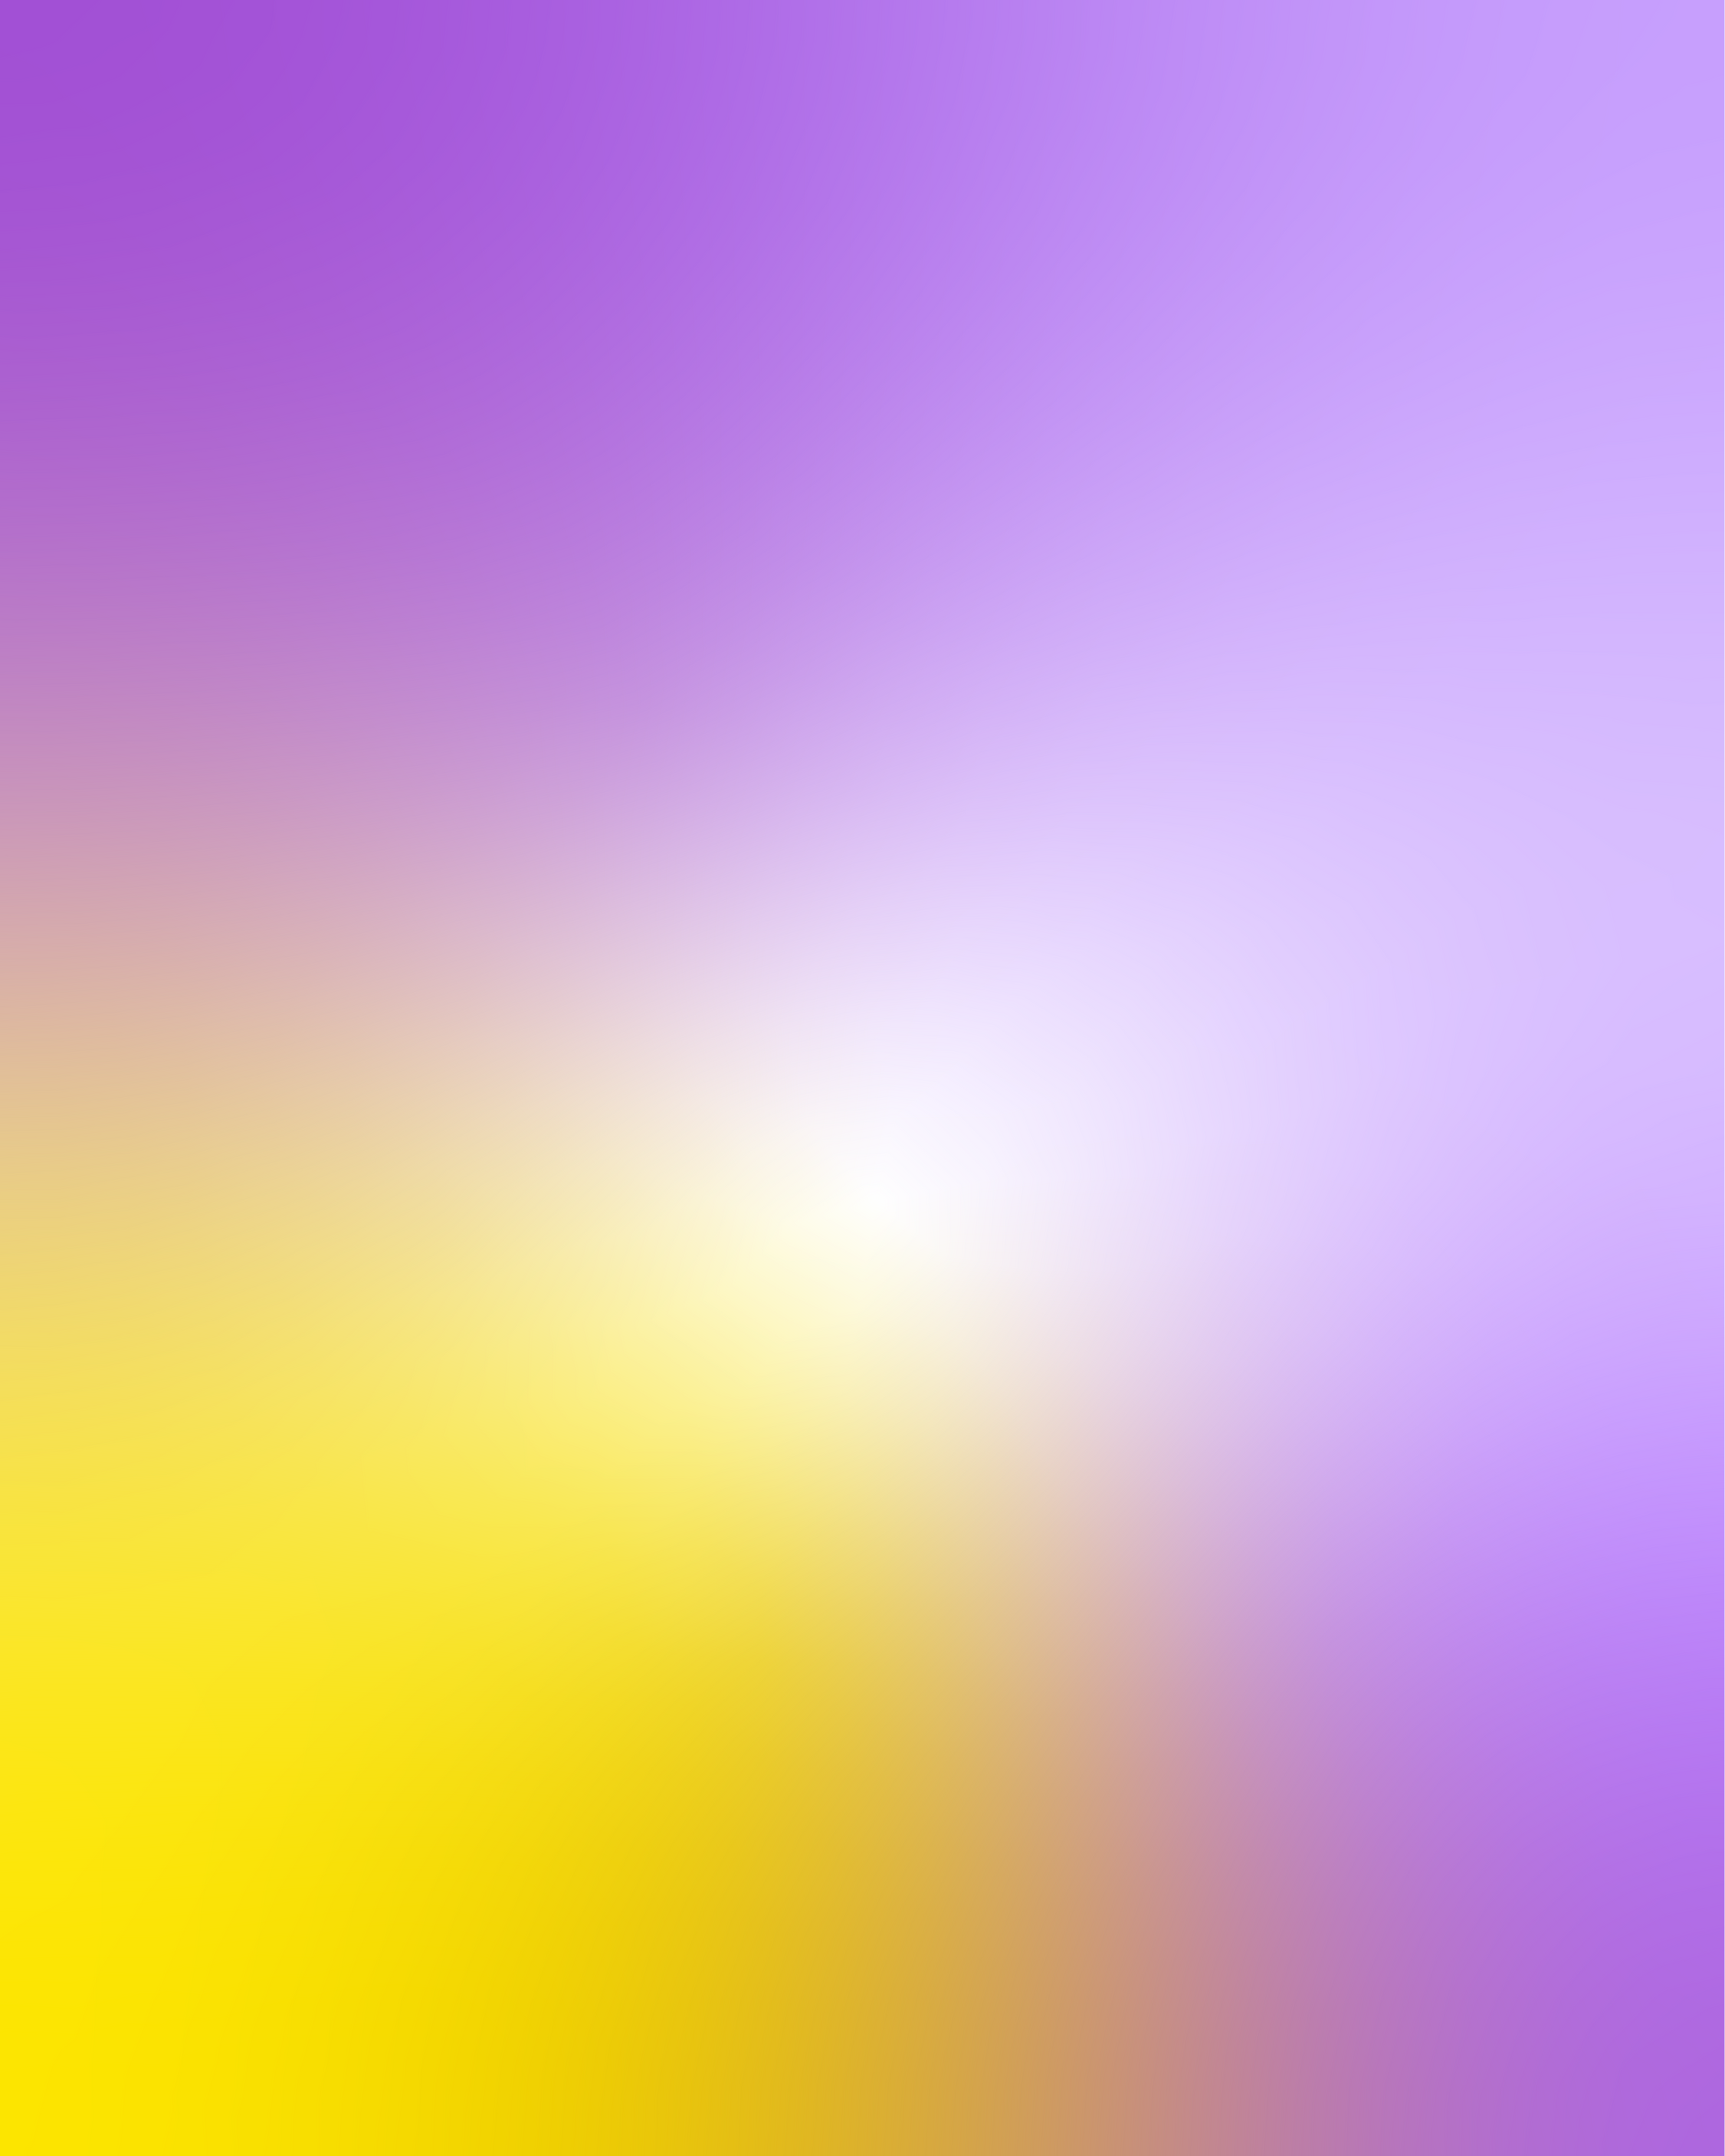 Modern Purple and Yellow Gradient Background